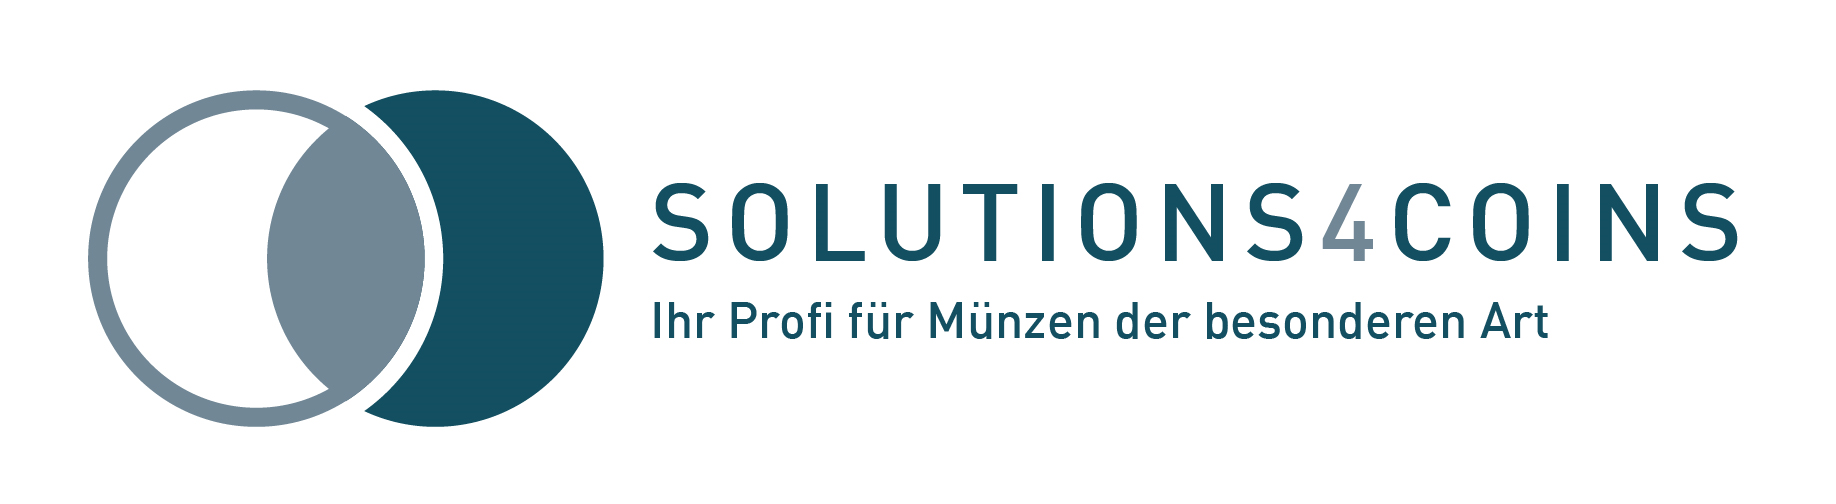 Solutions4coins-Logo